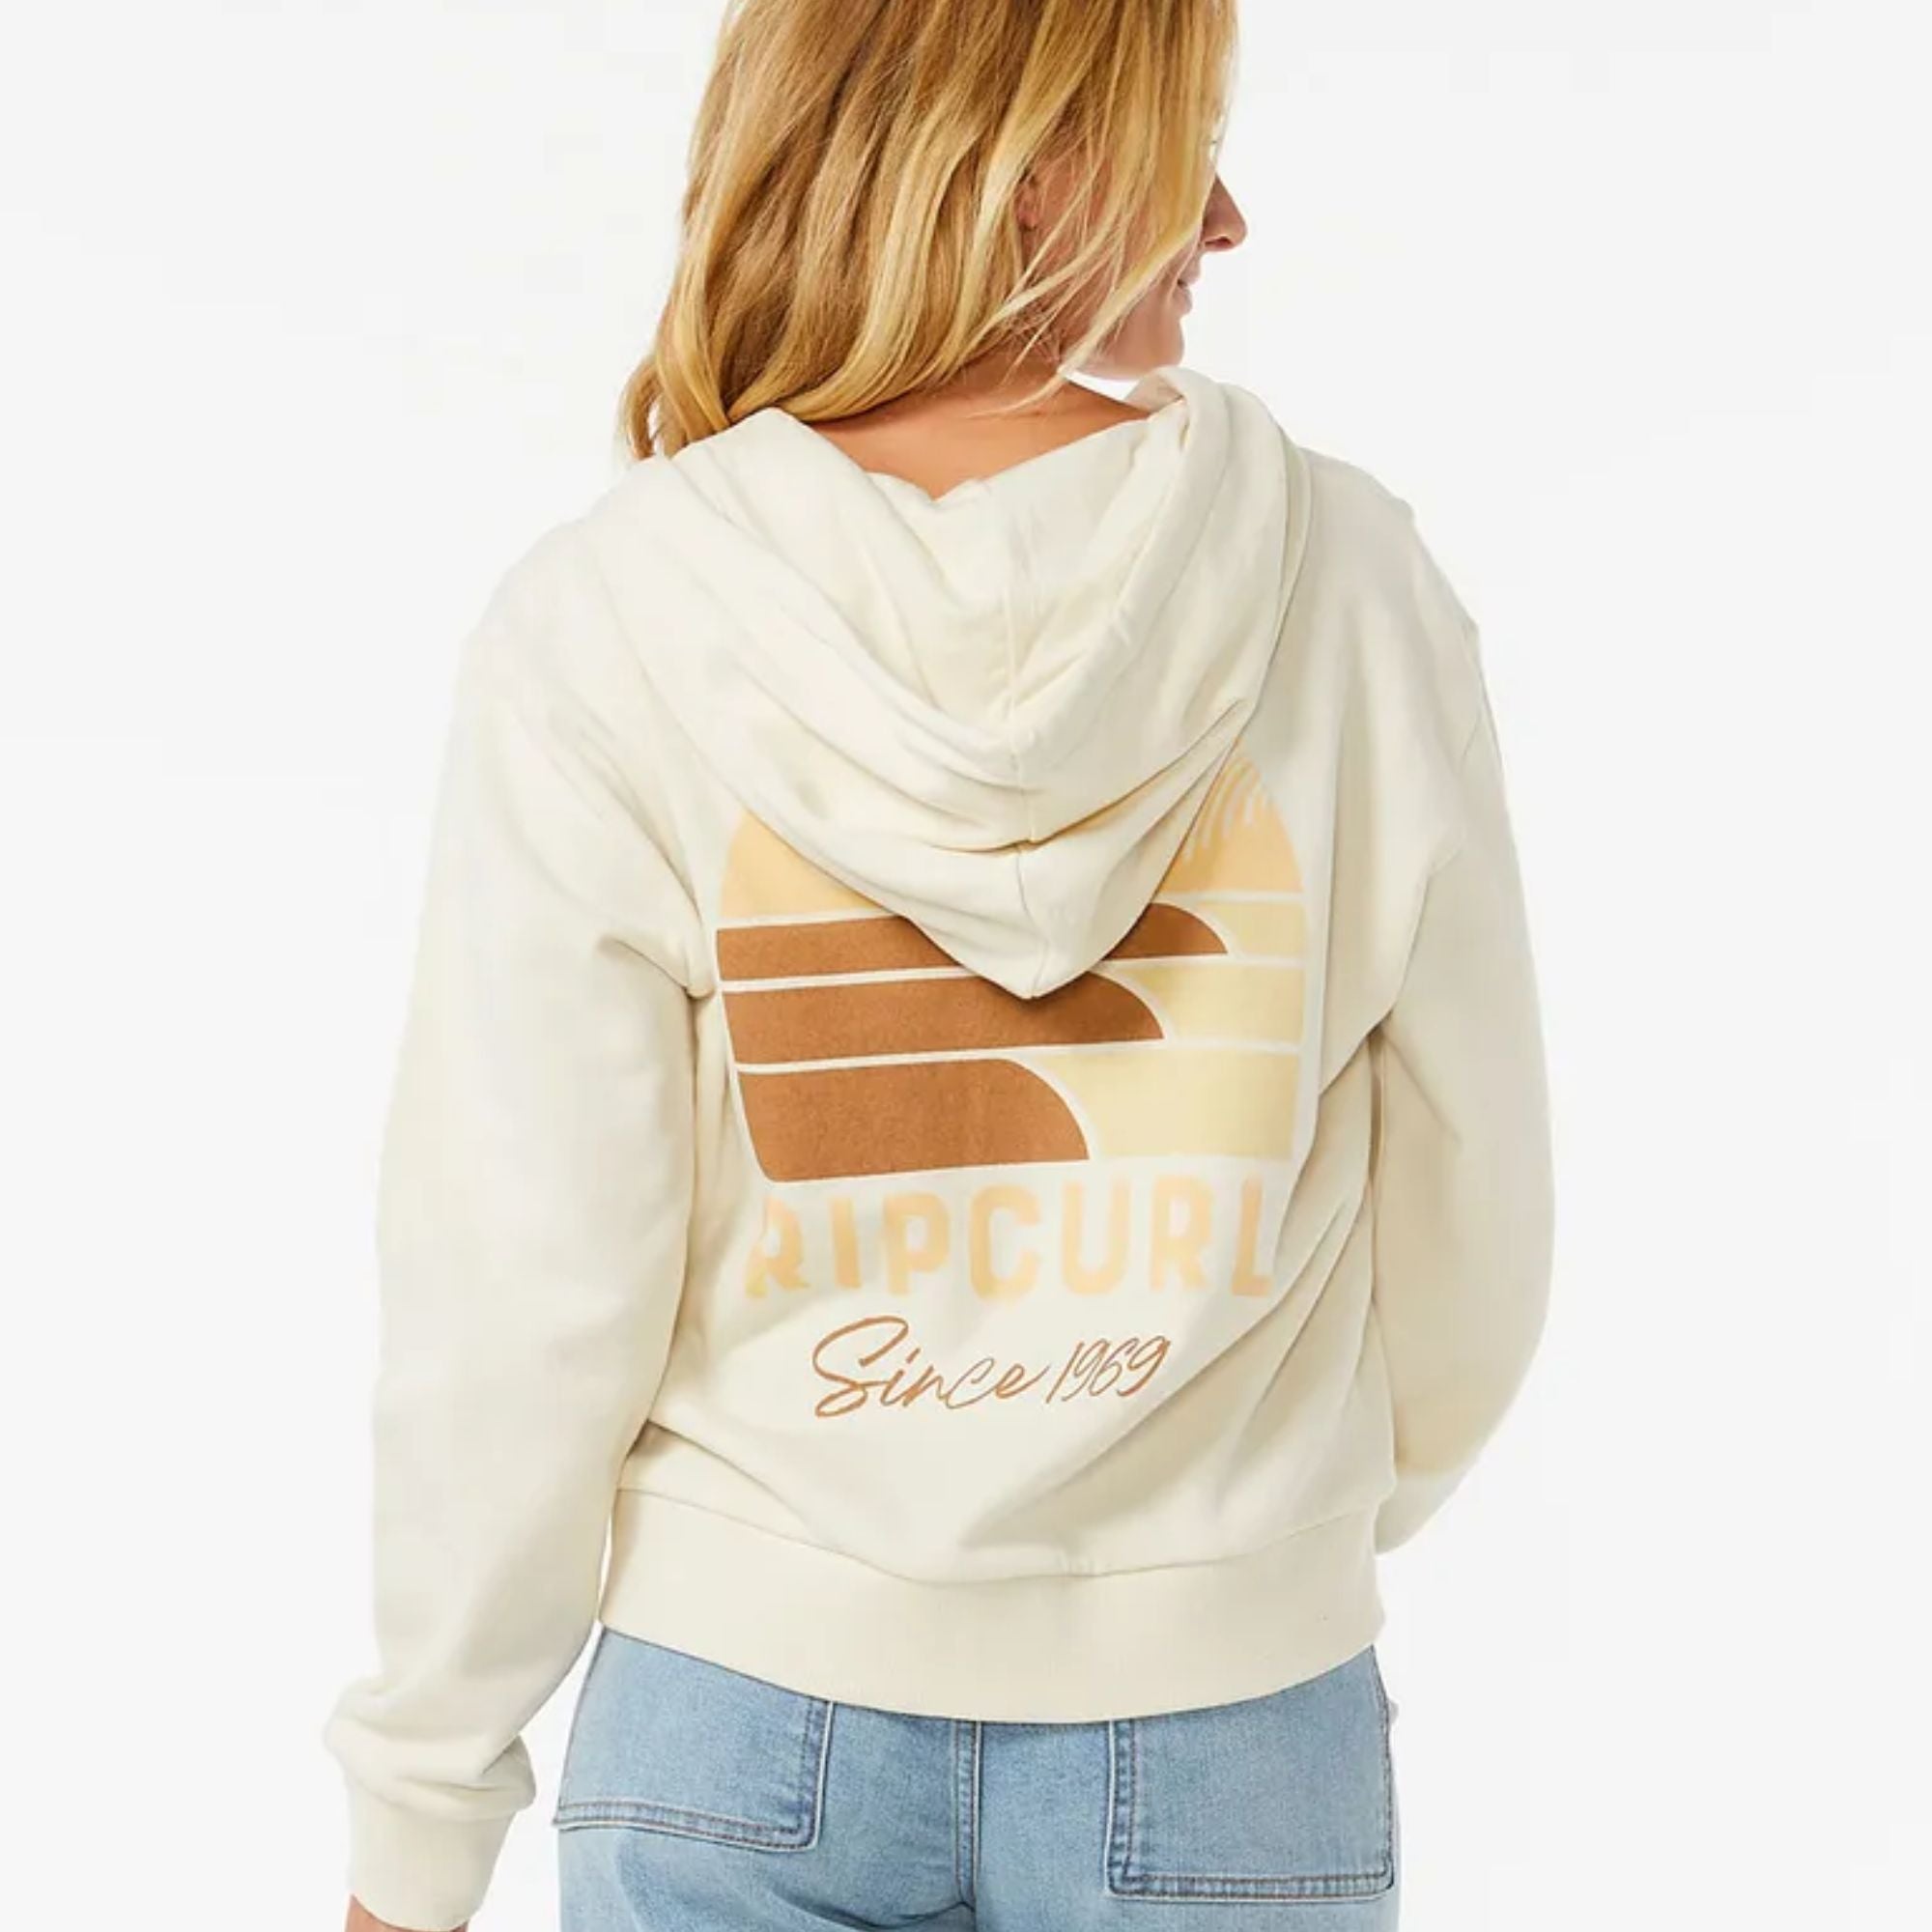 Ripcurl Women's Line UP relaxed Zip Through Hoody | RIPCURL | Portwest - The Outdoor Shop